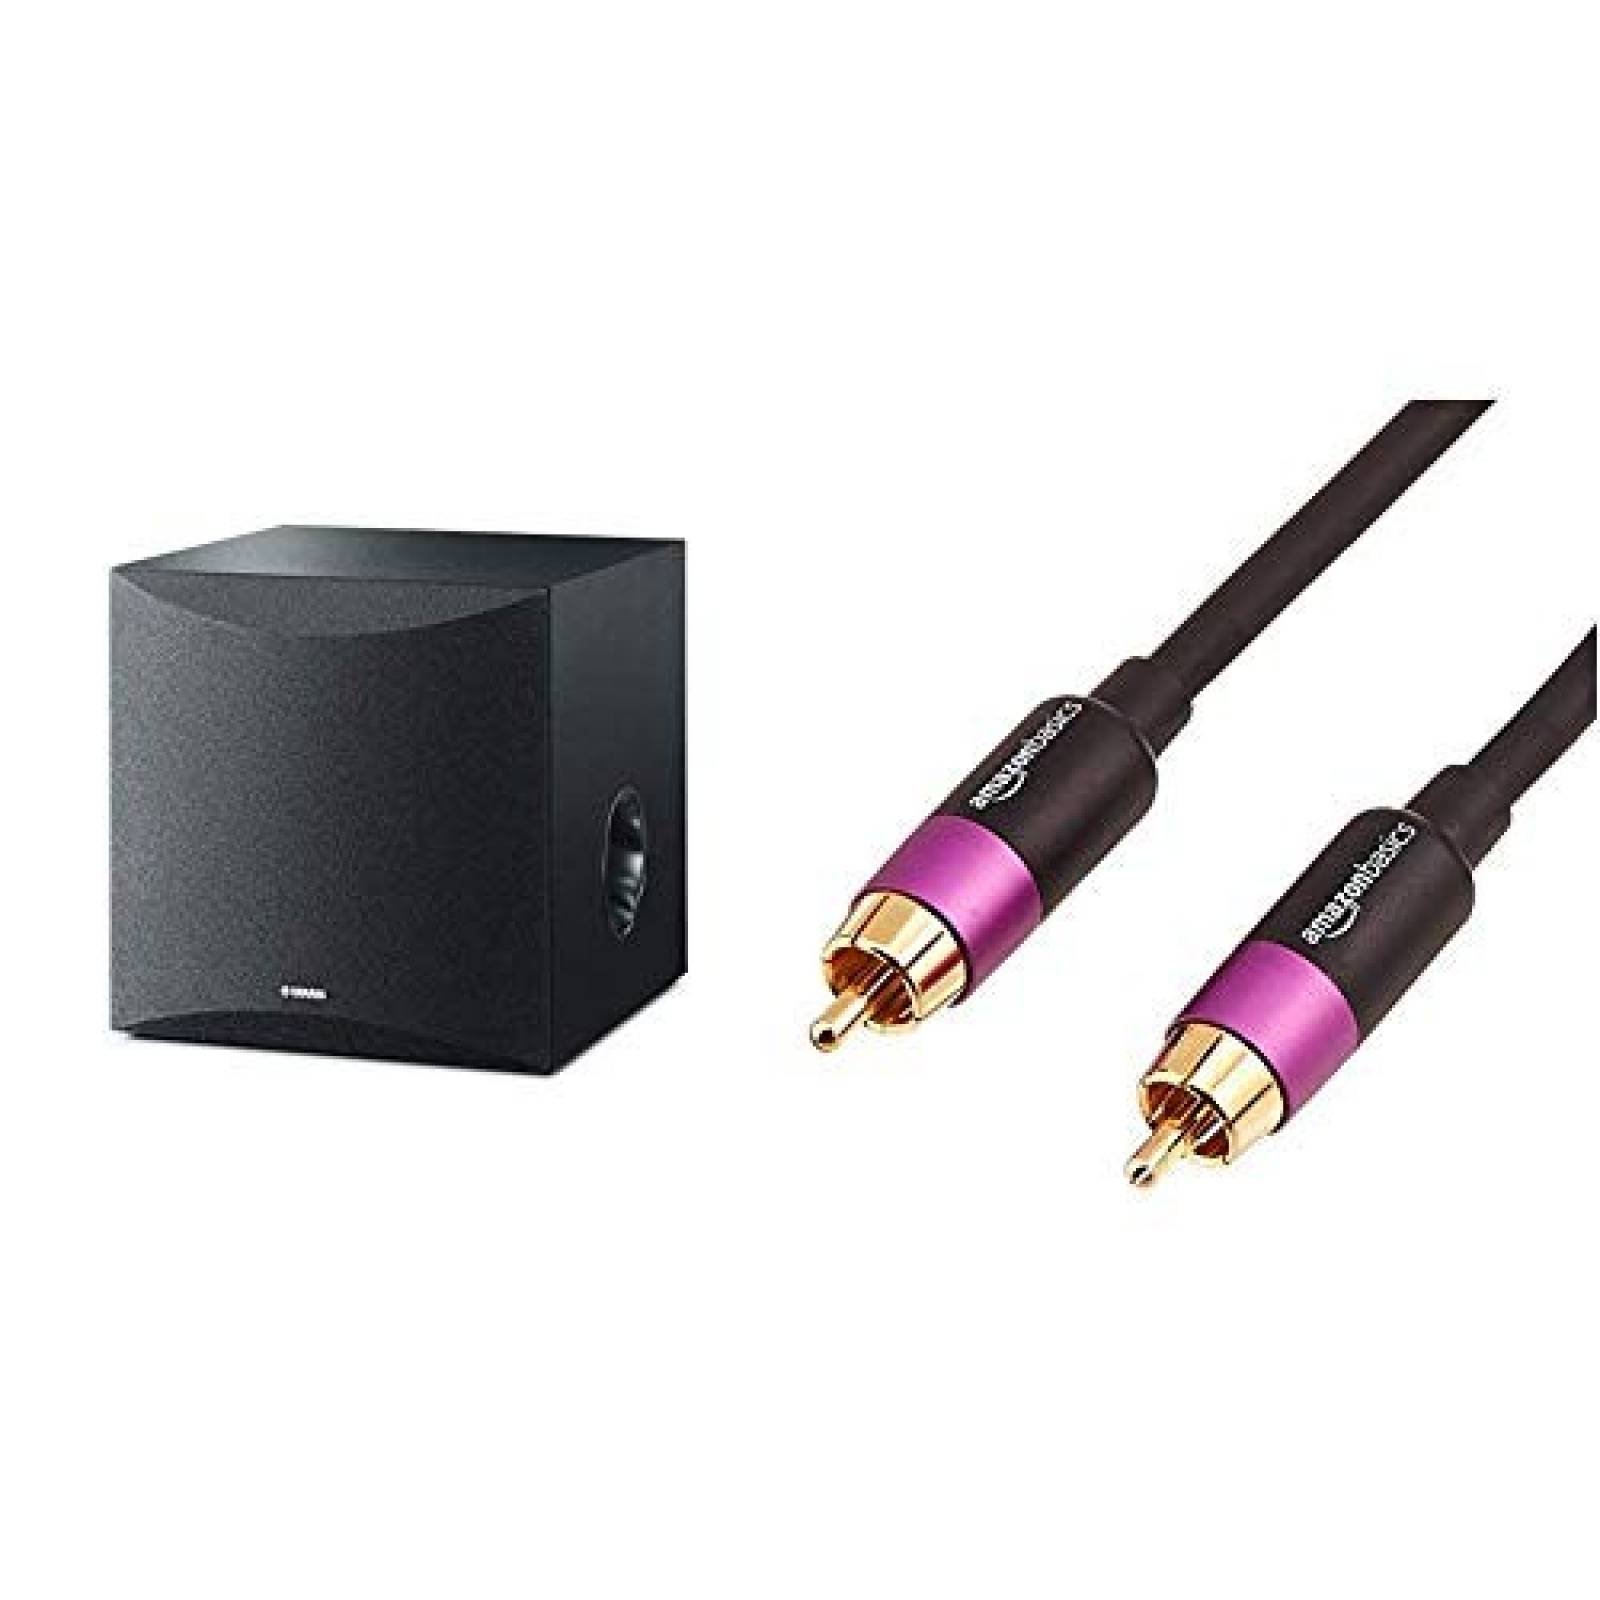 Subwoofer activo Yamaha Audio NS-SW050BL 8" y cable -negro